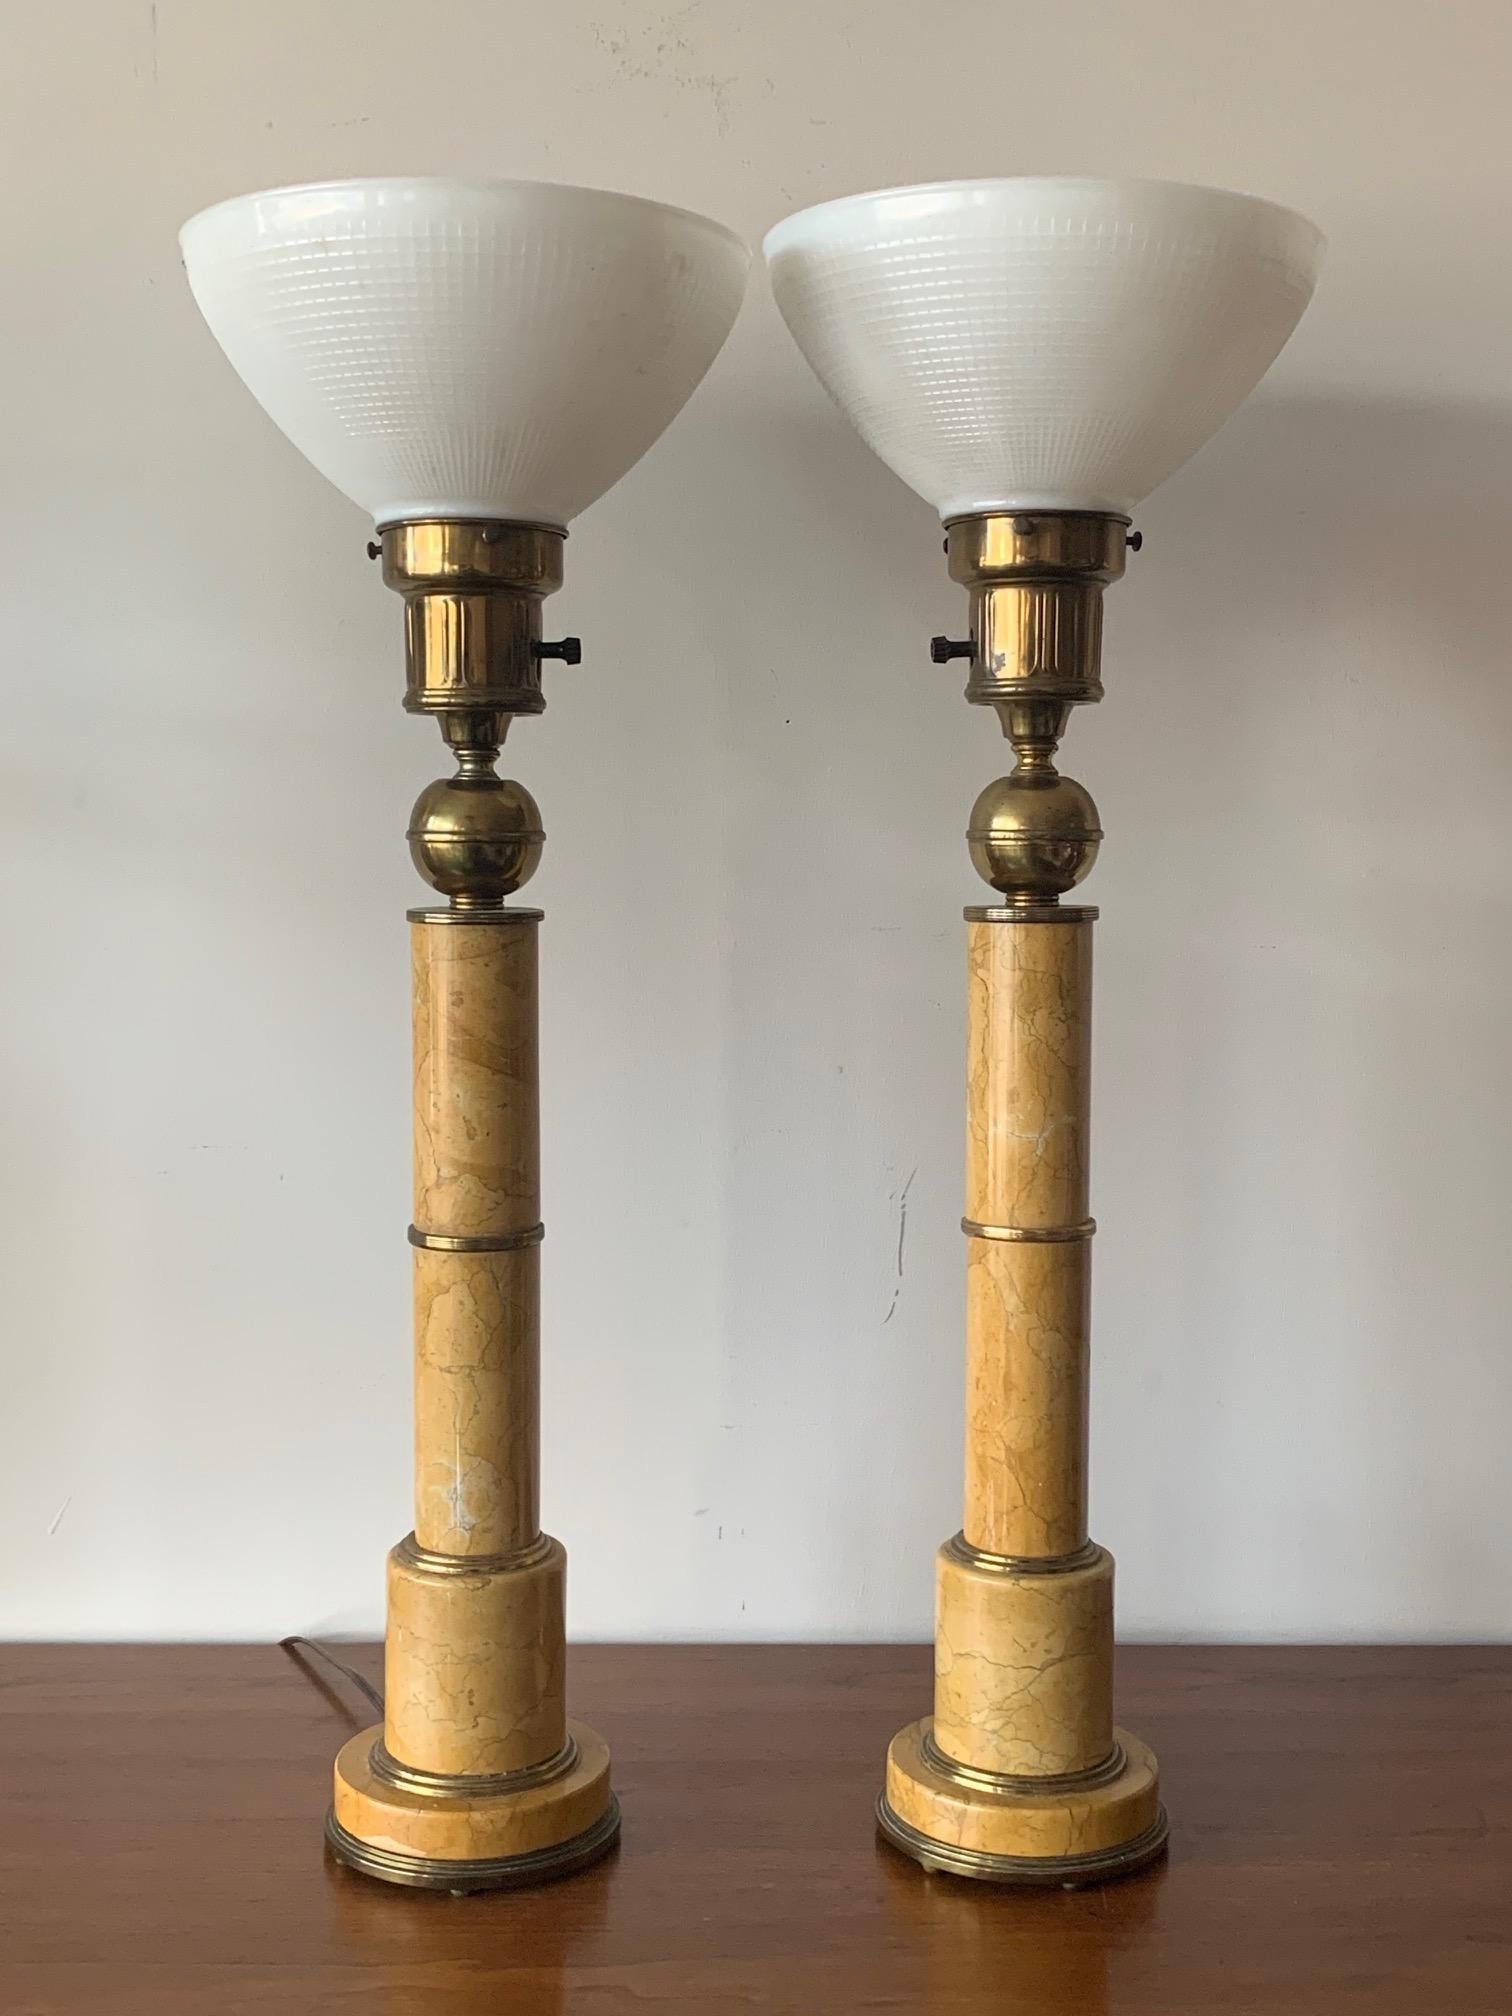 A pair of elegant Italian marble lamps circa 1950s. Very heavy with bronze mounts and brass details these lamps are exceptional and will fit in a variety of interiors-from modern to traditional.